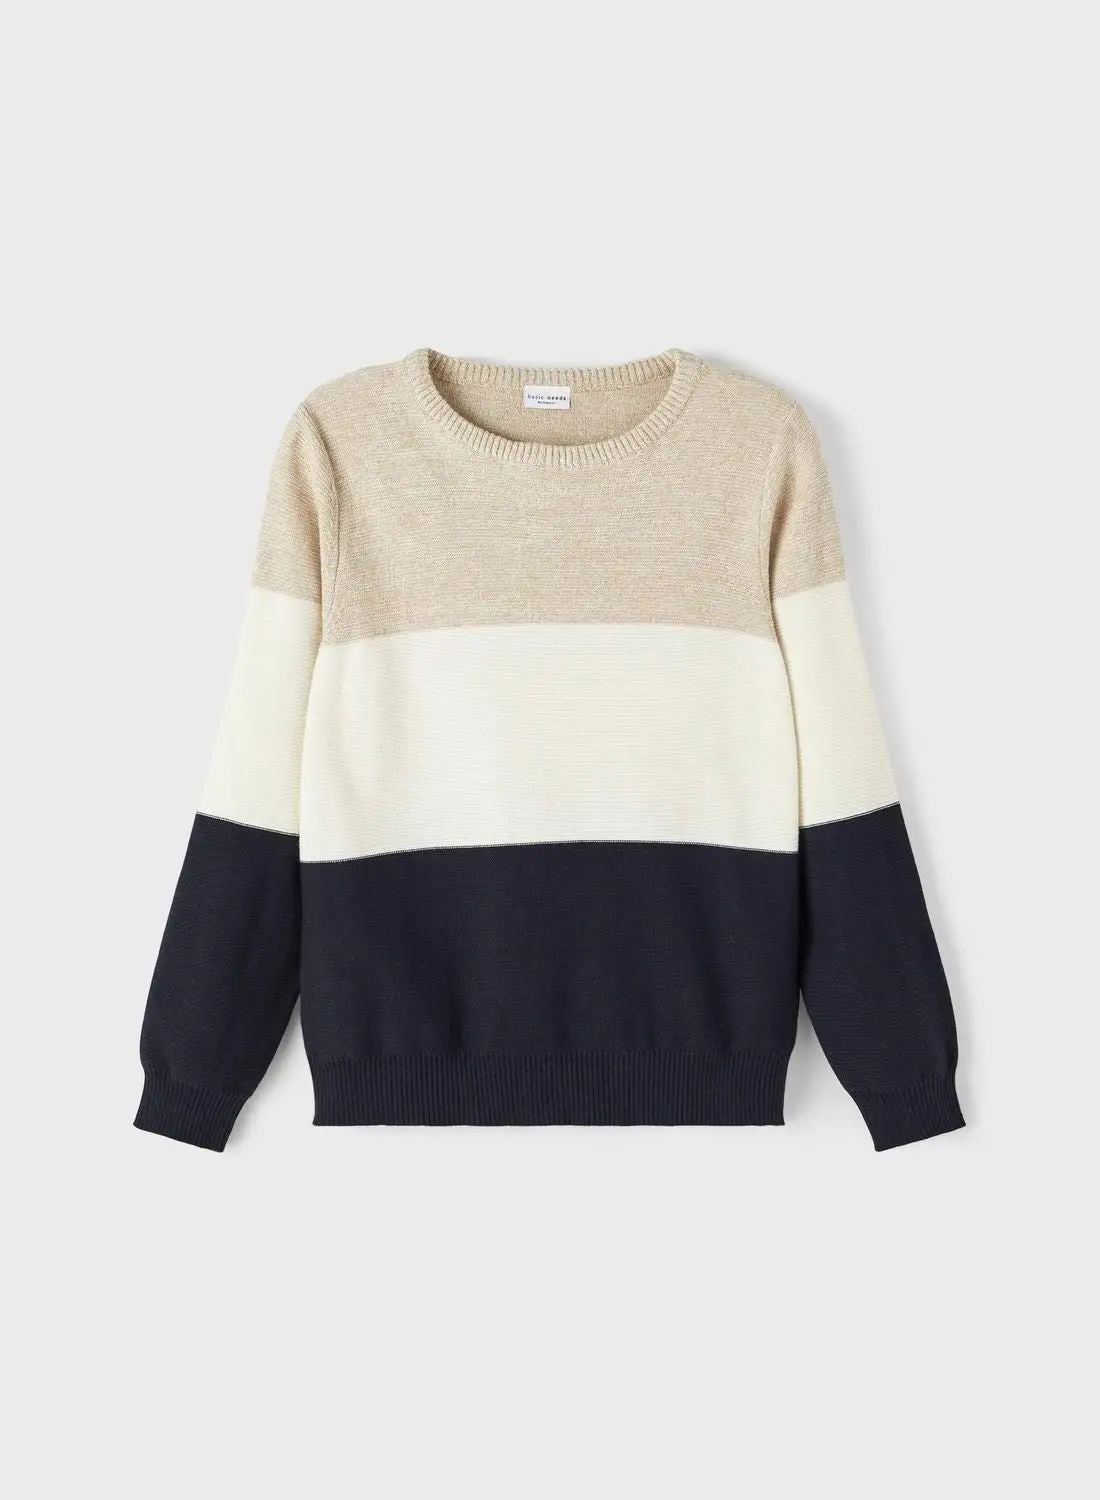 NAME IT Kids Color Block Sweater